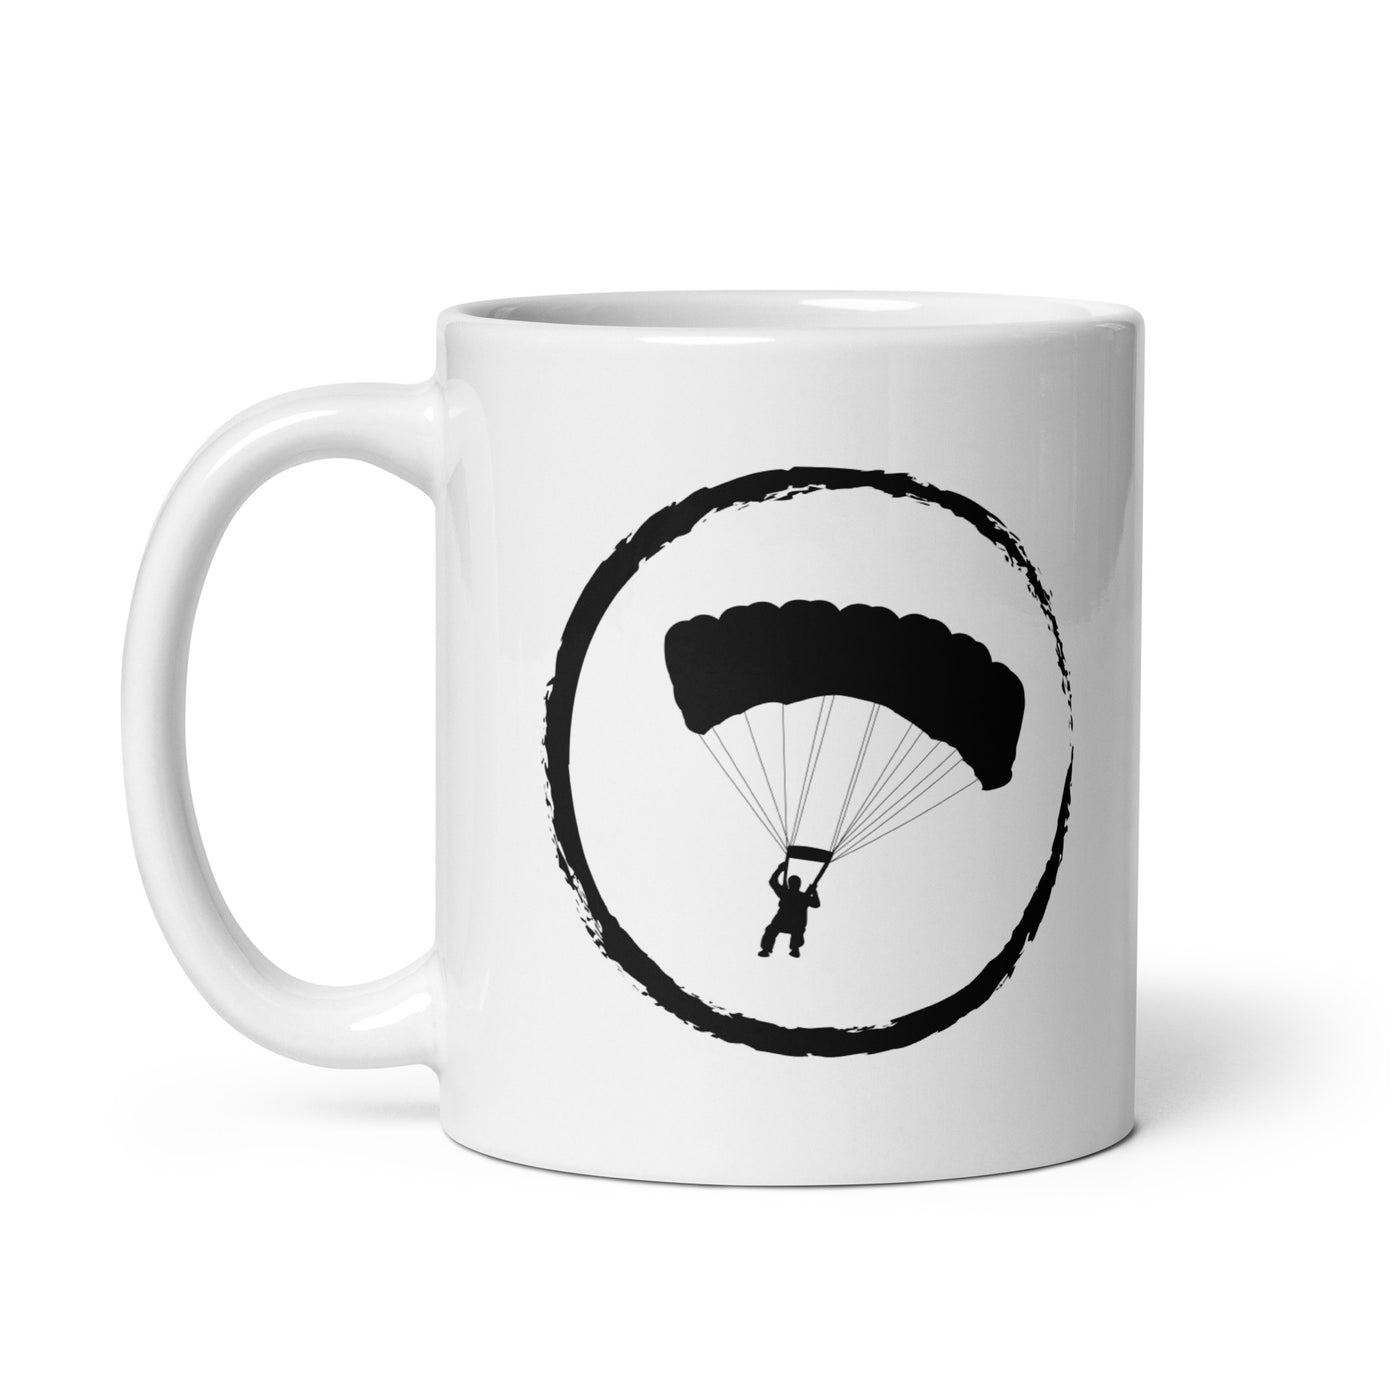 Cricle And Paragliding - Tasse berge 11oz